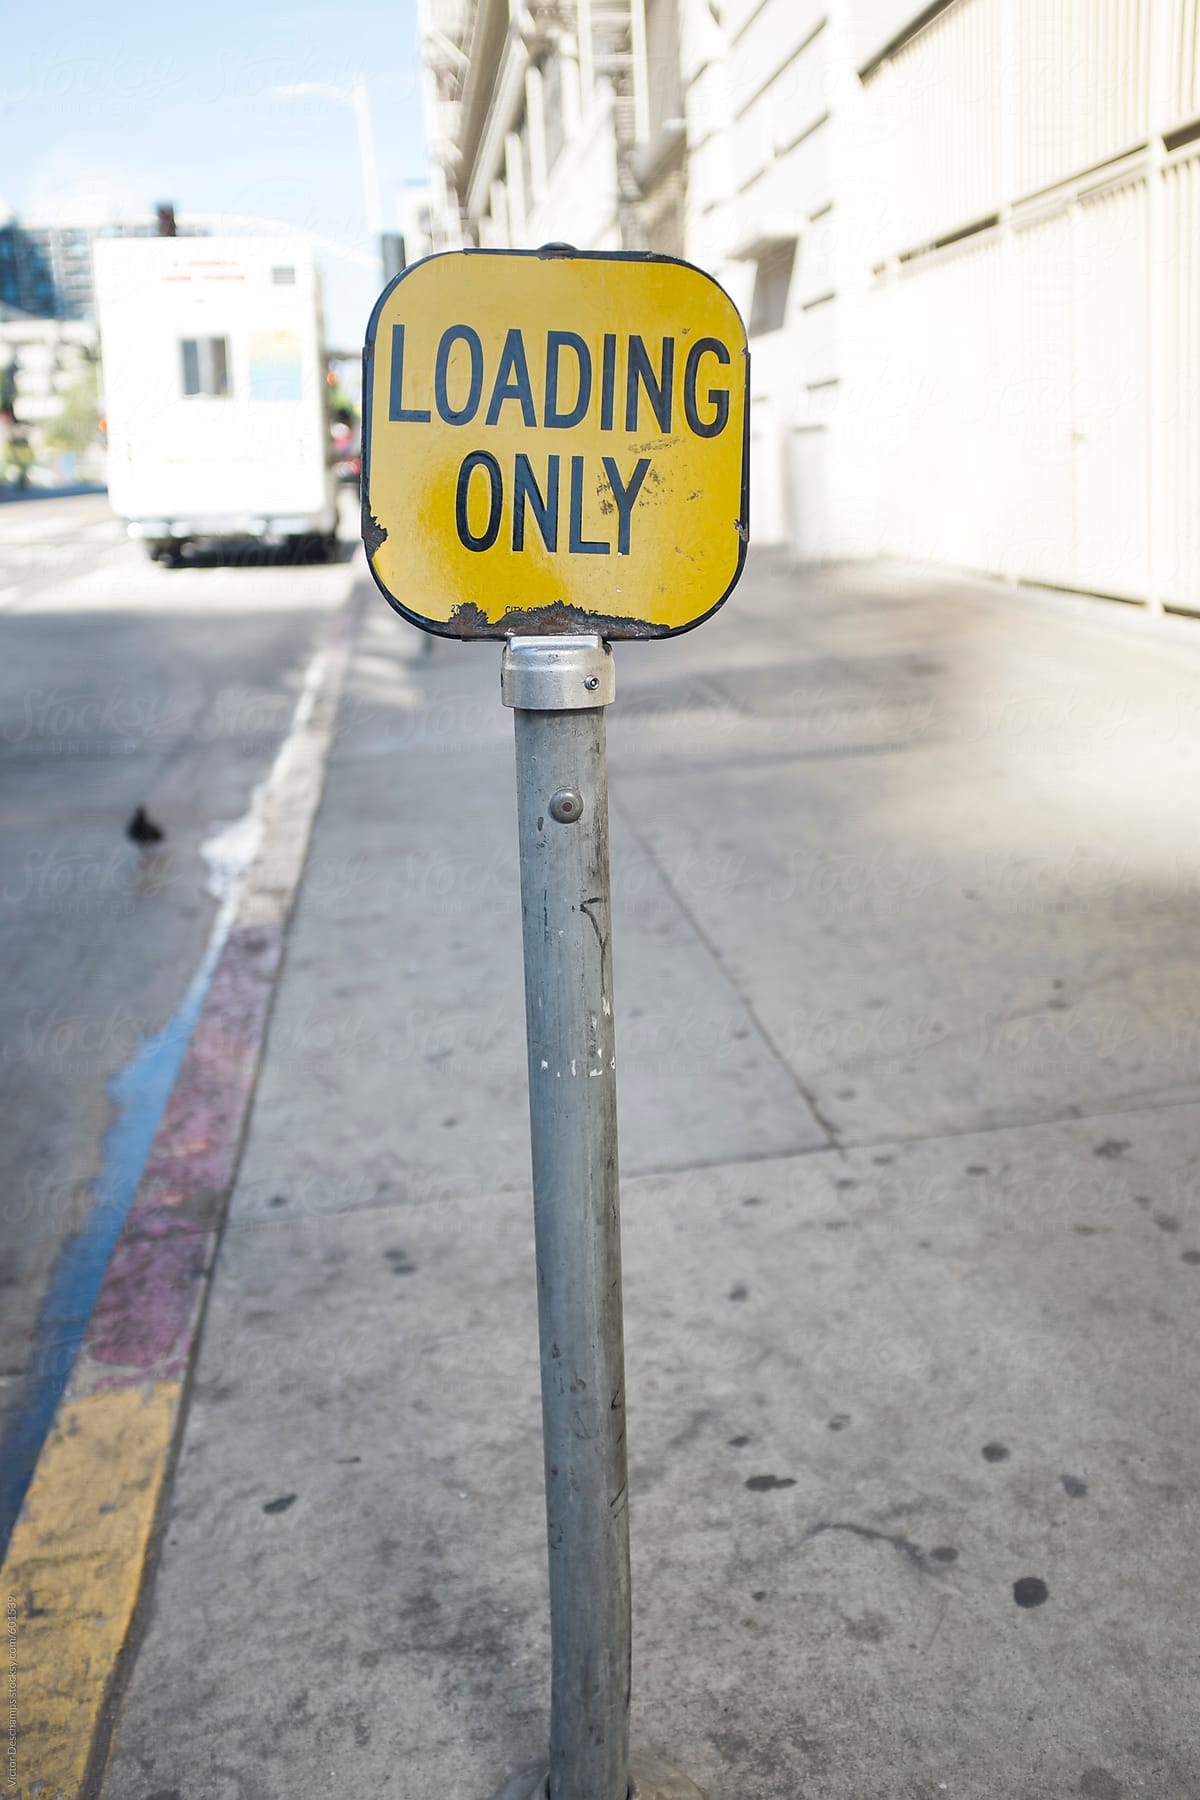 Loading only sign